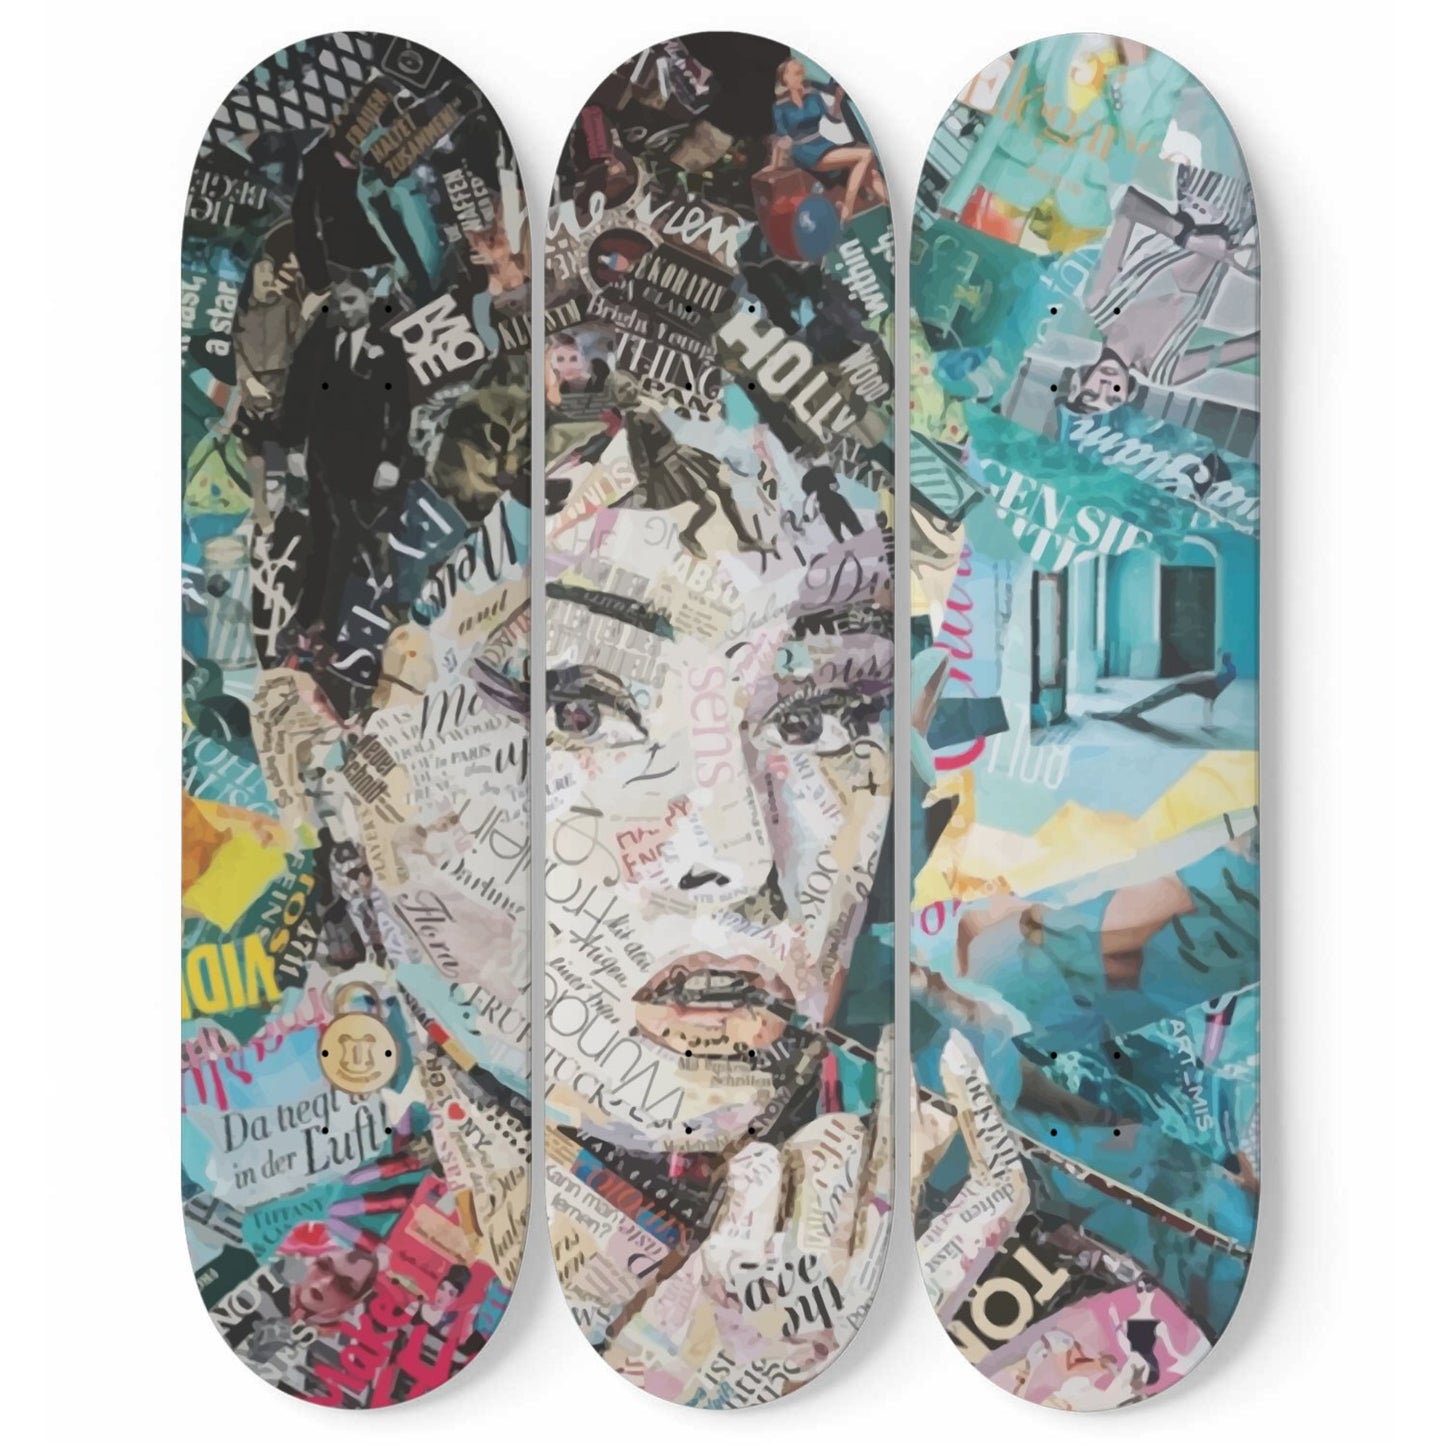 Audrey Hepburn Artwork 10 | 3-piece Skateboard Wall Art | Made with Maple Wood | Wall Hanging Decoration | Best Unique Gift for Home Decor